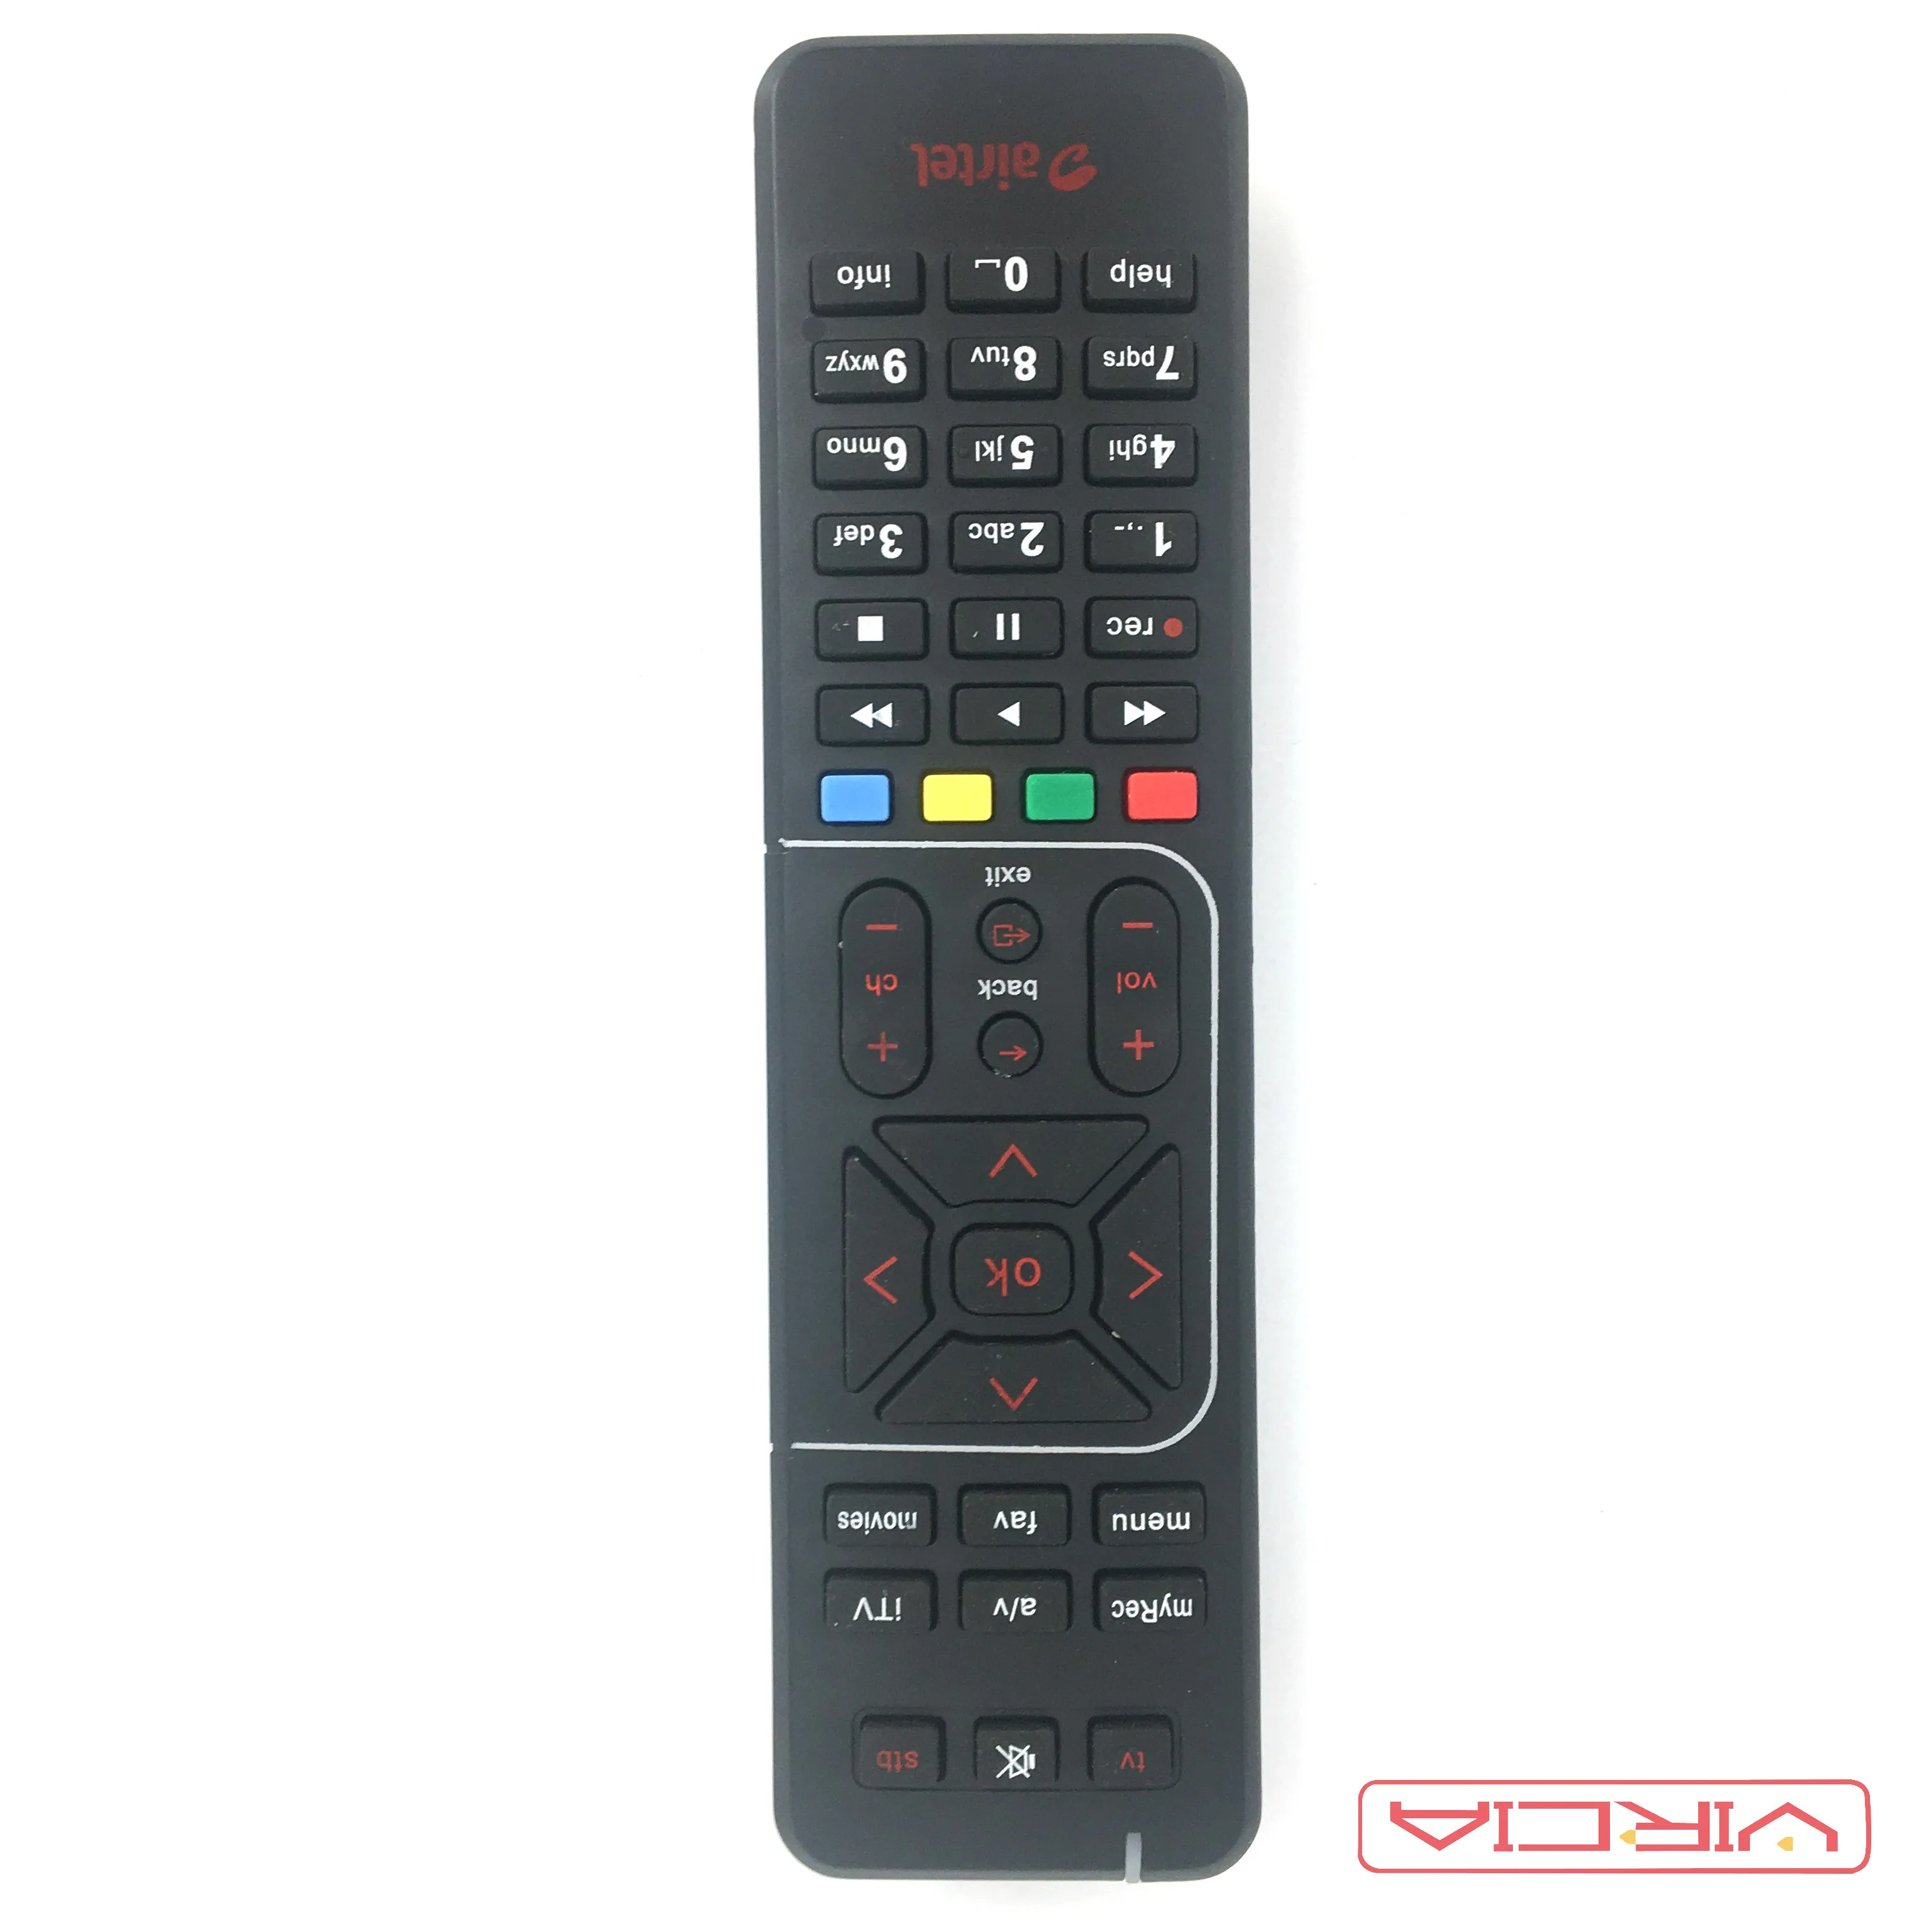 

VIRCIA High quality Airtel D2H GTPL HD Hathway TATA SKY dish TV TP1-01 remote control with learning function for India market, Black